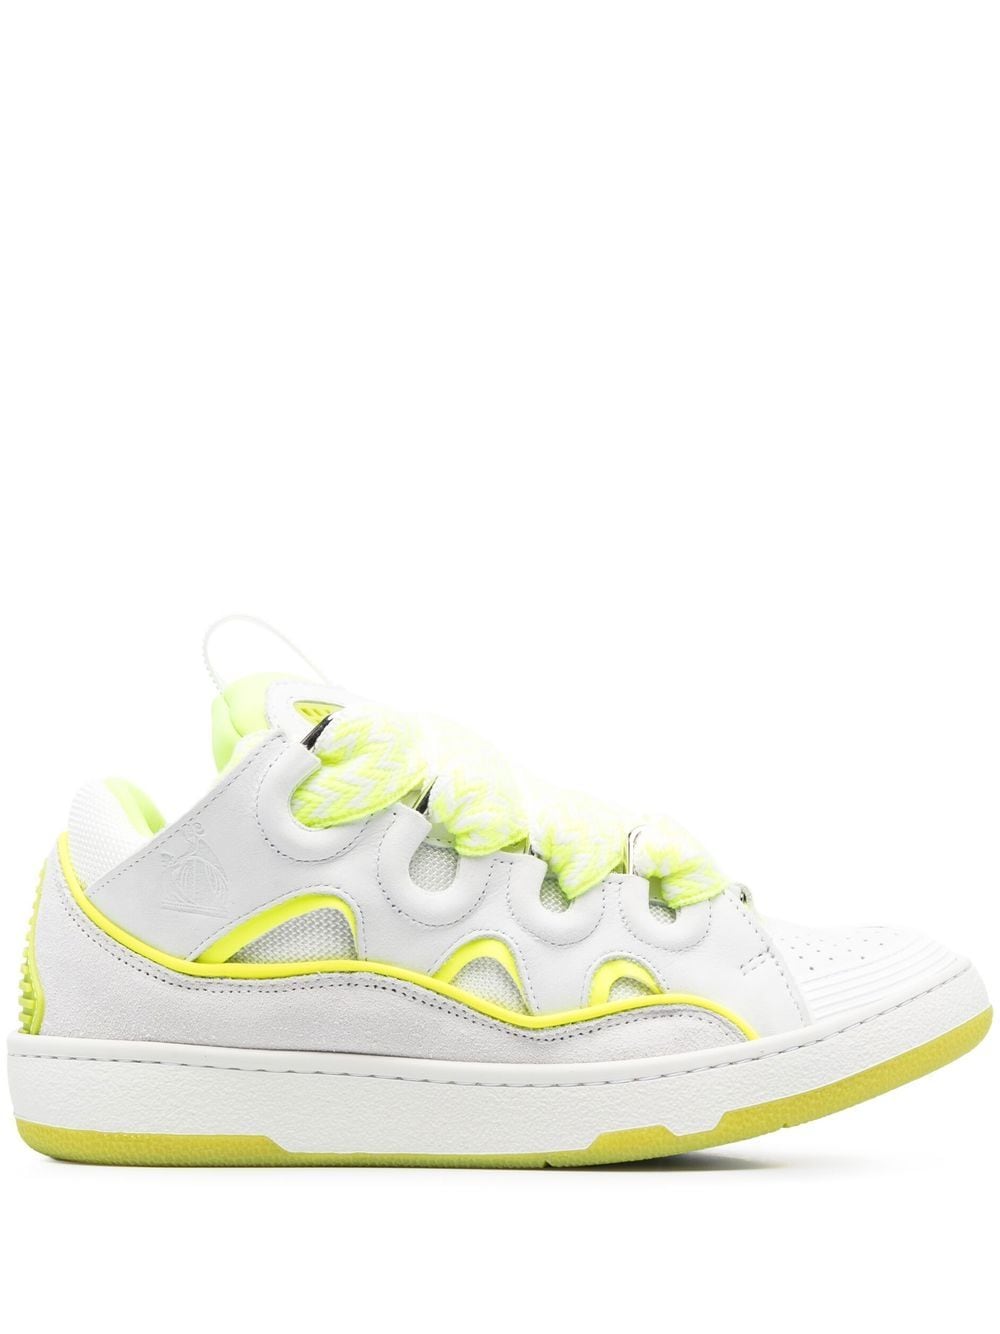 LANVIN CURB PANELLED LACE-UP SNEAKERS